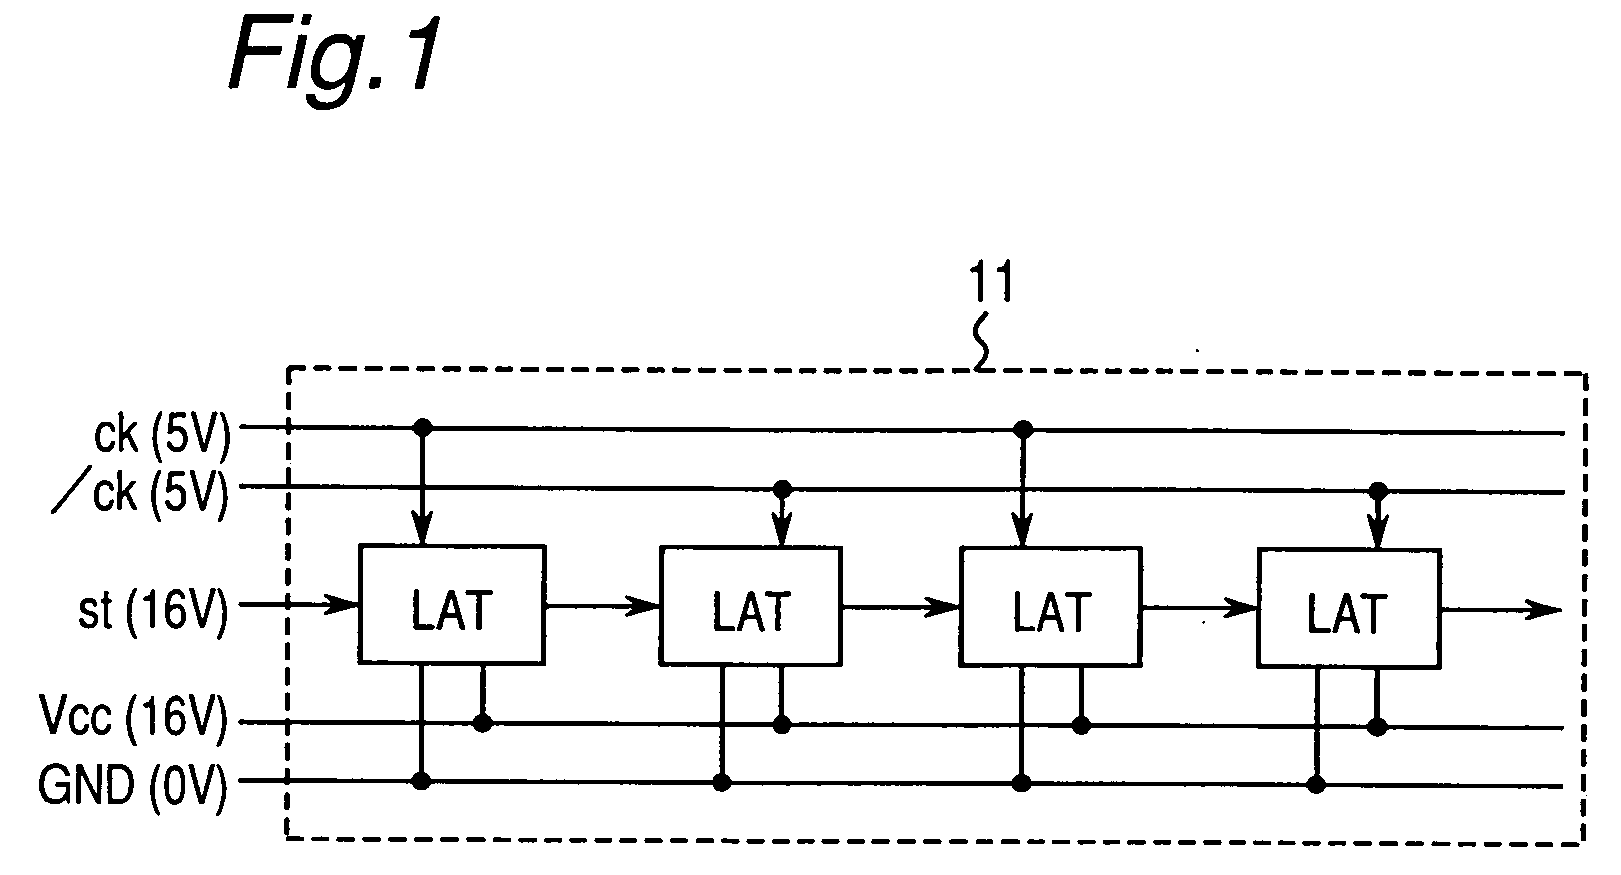 Latch circuit, shift register circuit, logical circuit and image display device operated with a low consumption of power